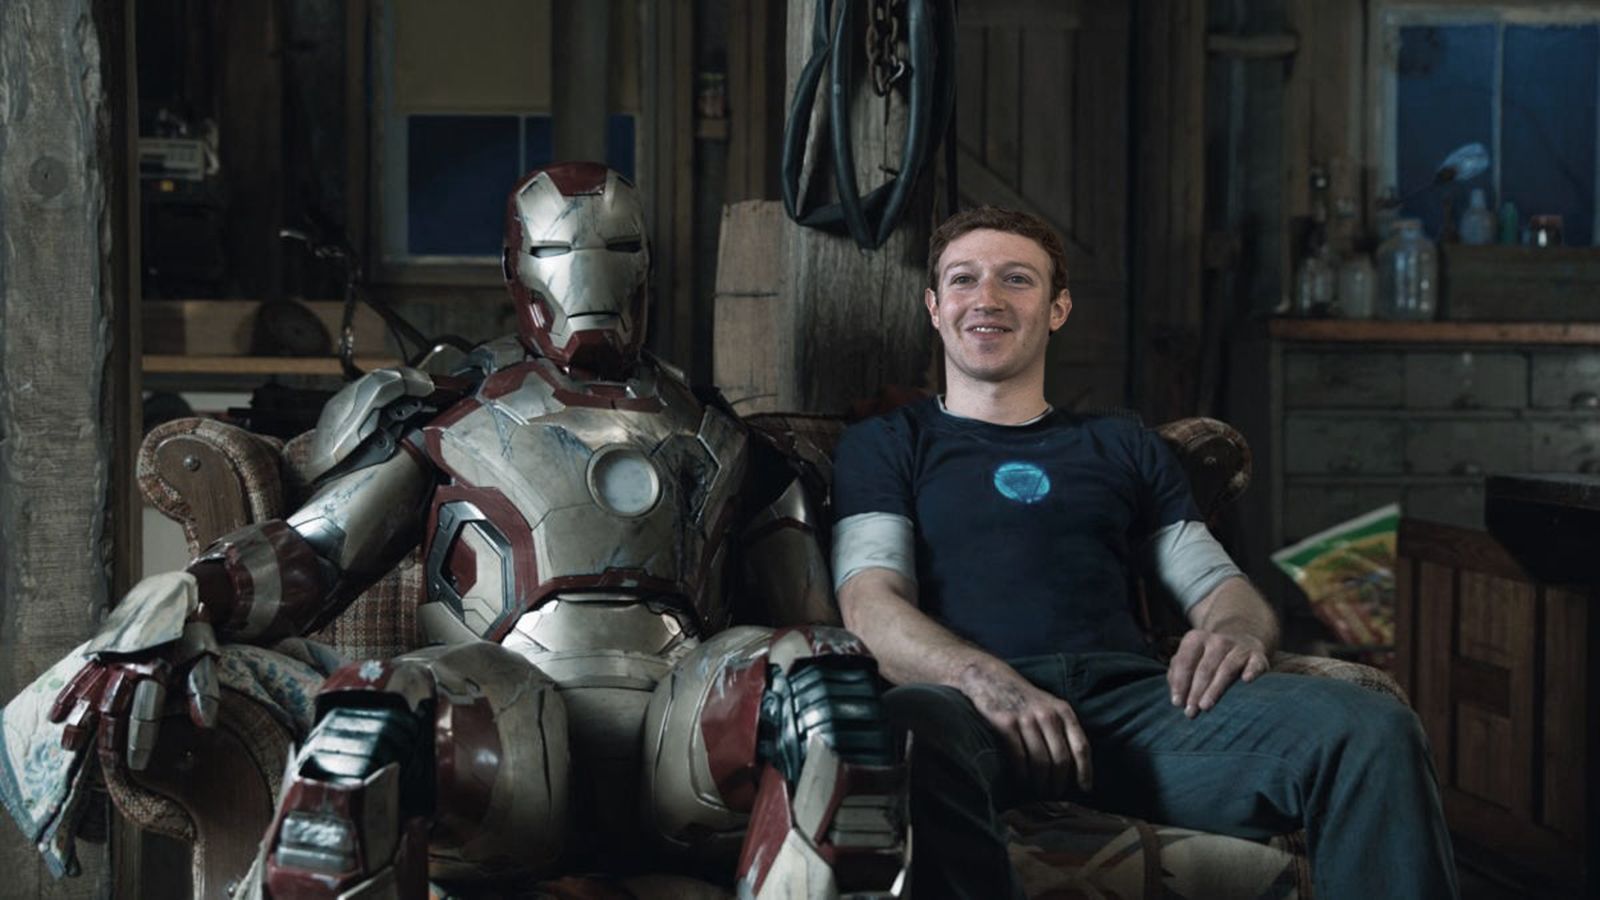 mark zuckerberg plans to make iron man’s jarvis ai a reality in 2016 image 1